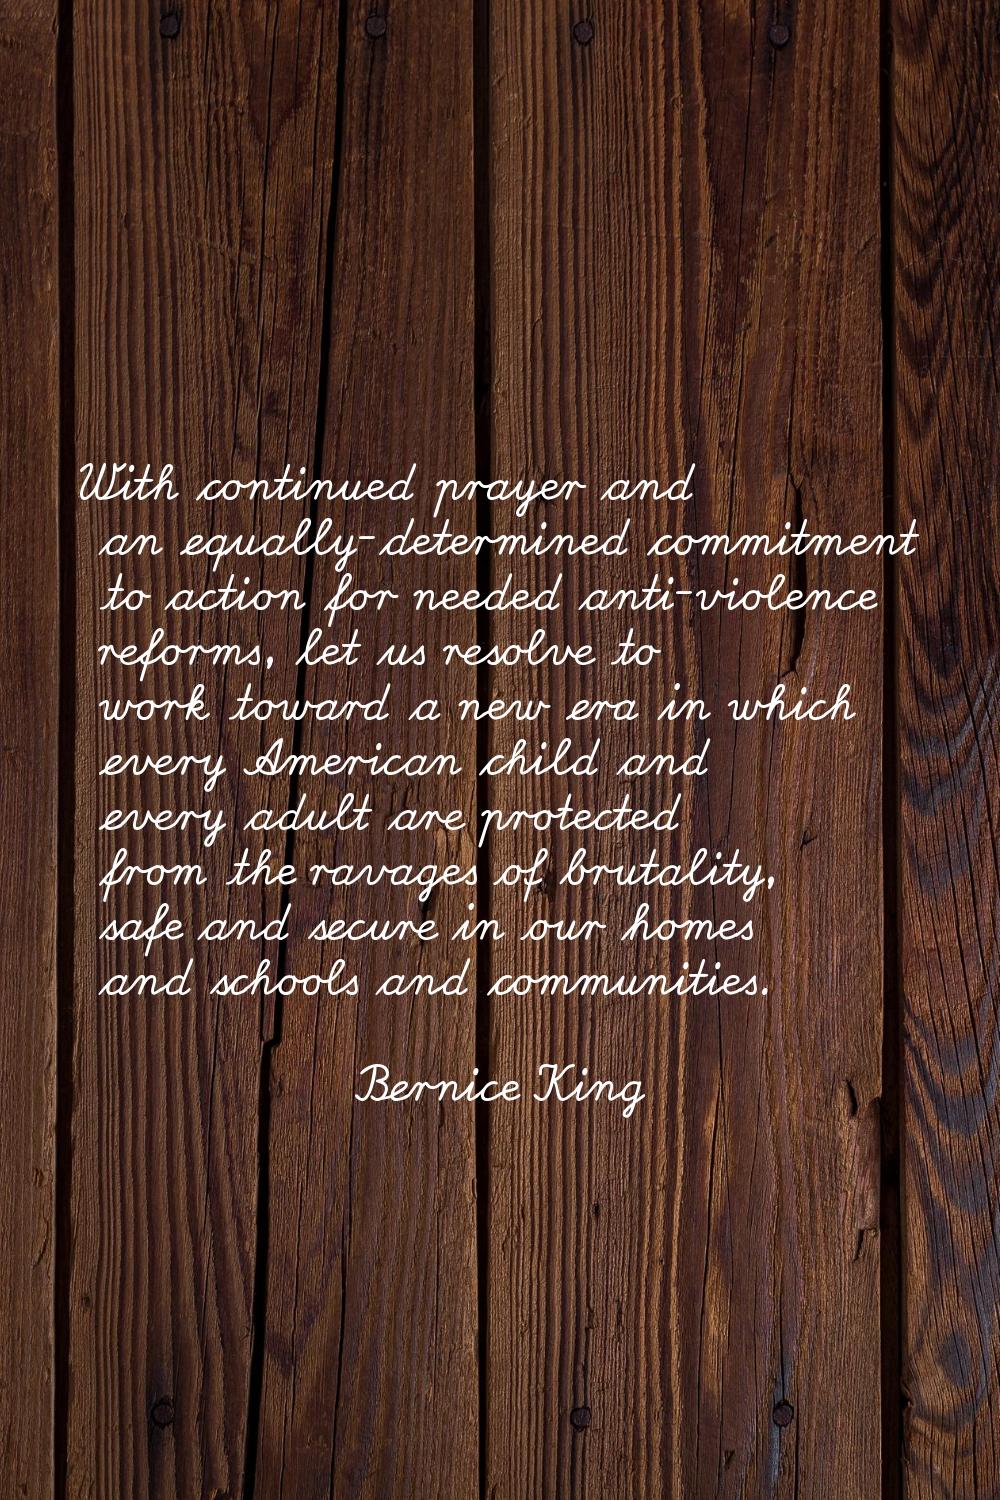 With continued prayer and an equally-determined commitment to action for needed anti-violence refor